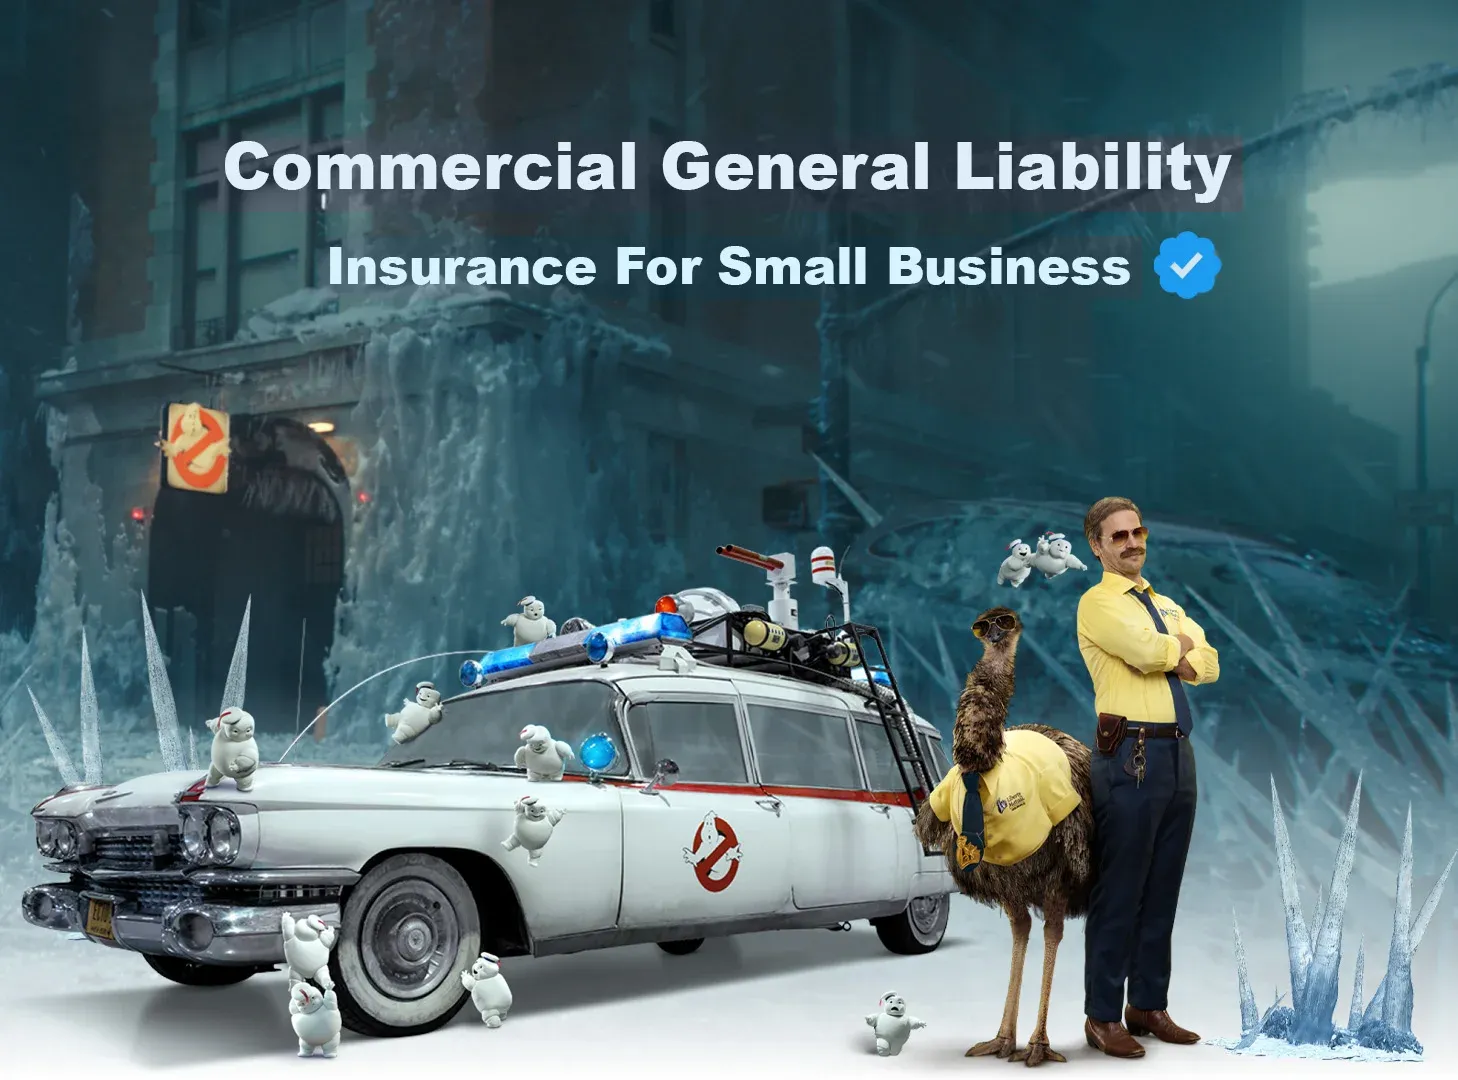 Commercial General Liability Insurance For Small Business